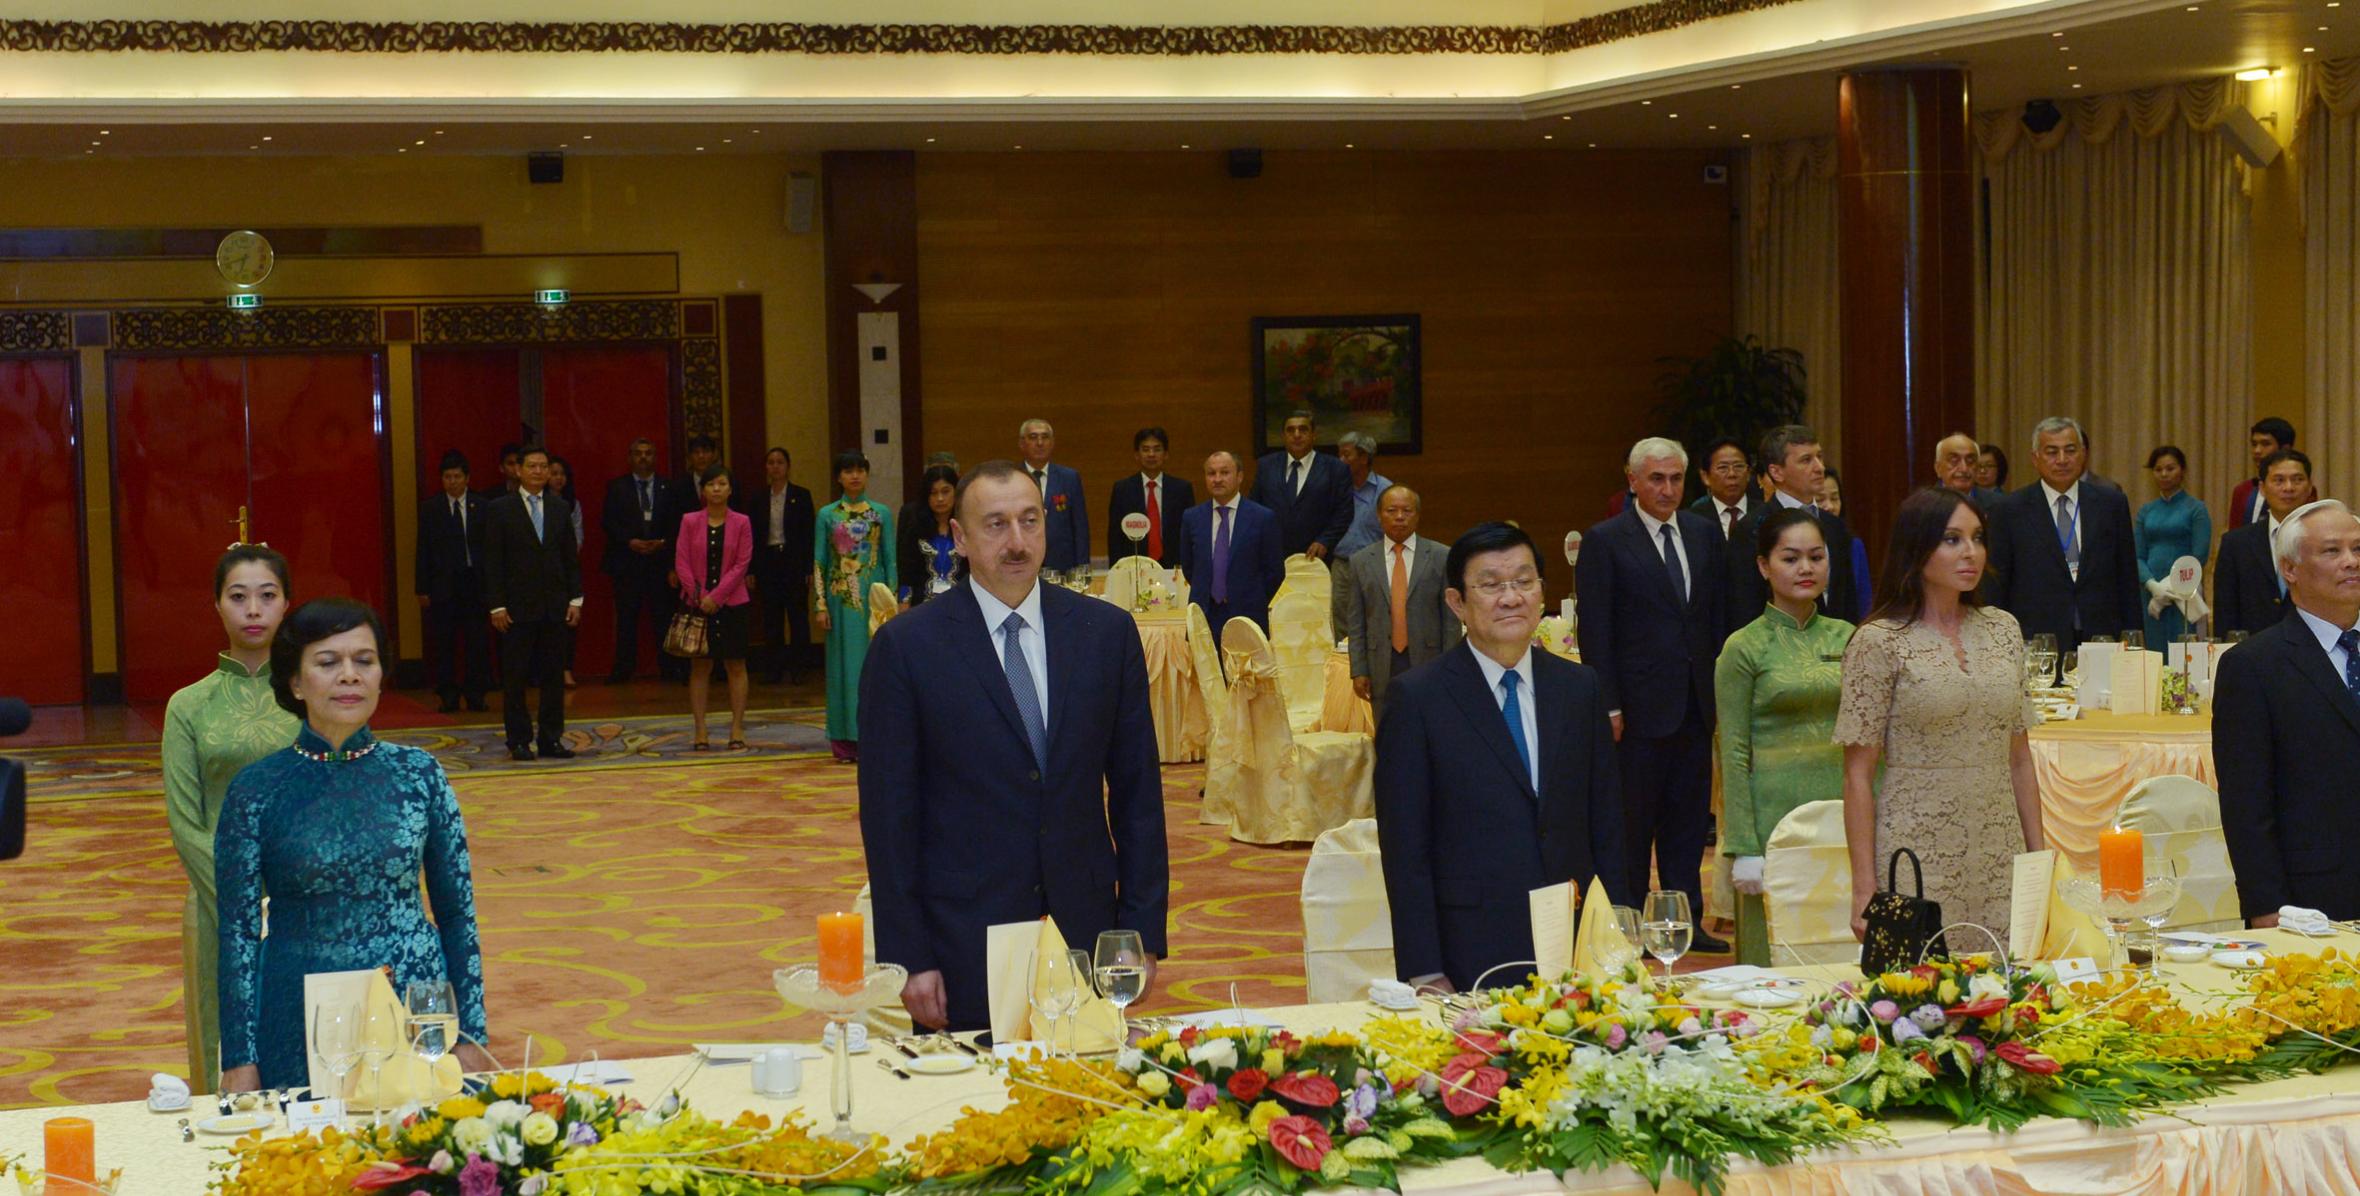 Dinner reception was hosted in honor of Ilham Aliyev in Vietnam